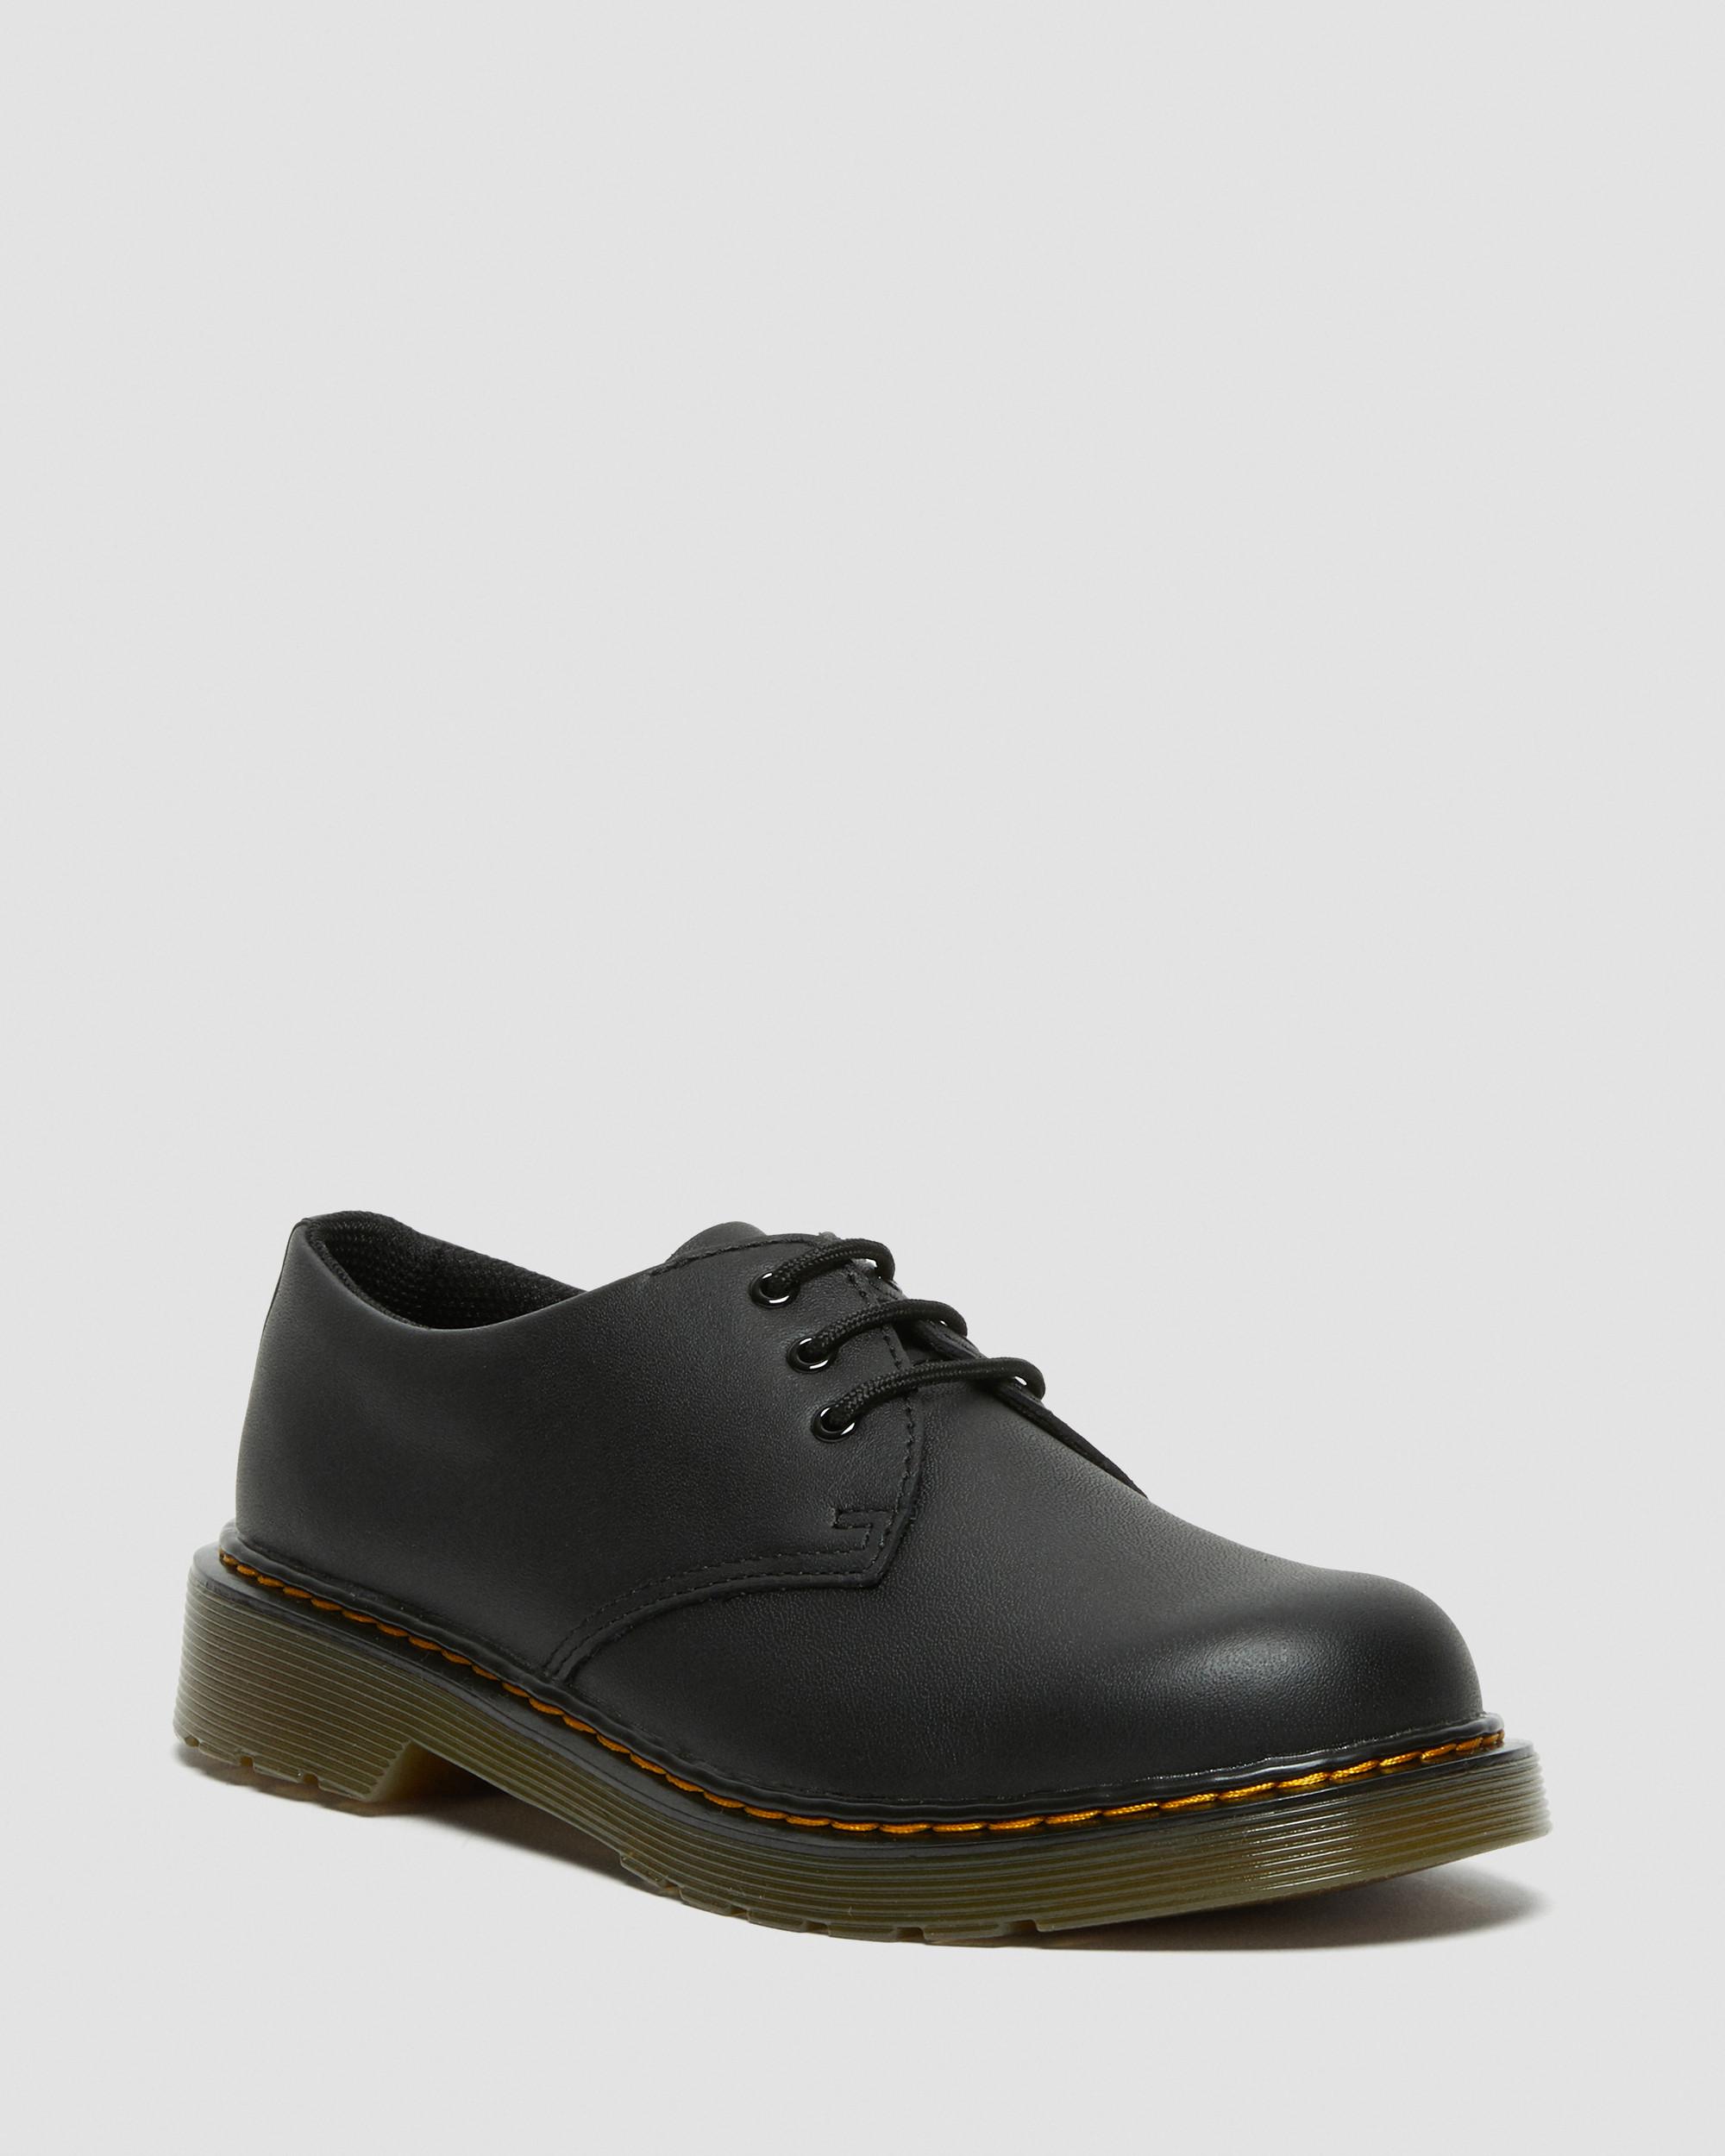 YOUTH 1461 SOFTY T LEATHER SHOES | Dr 